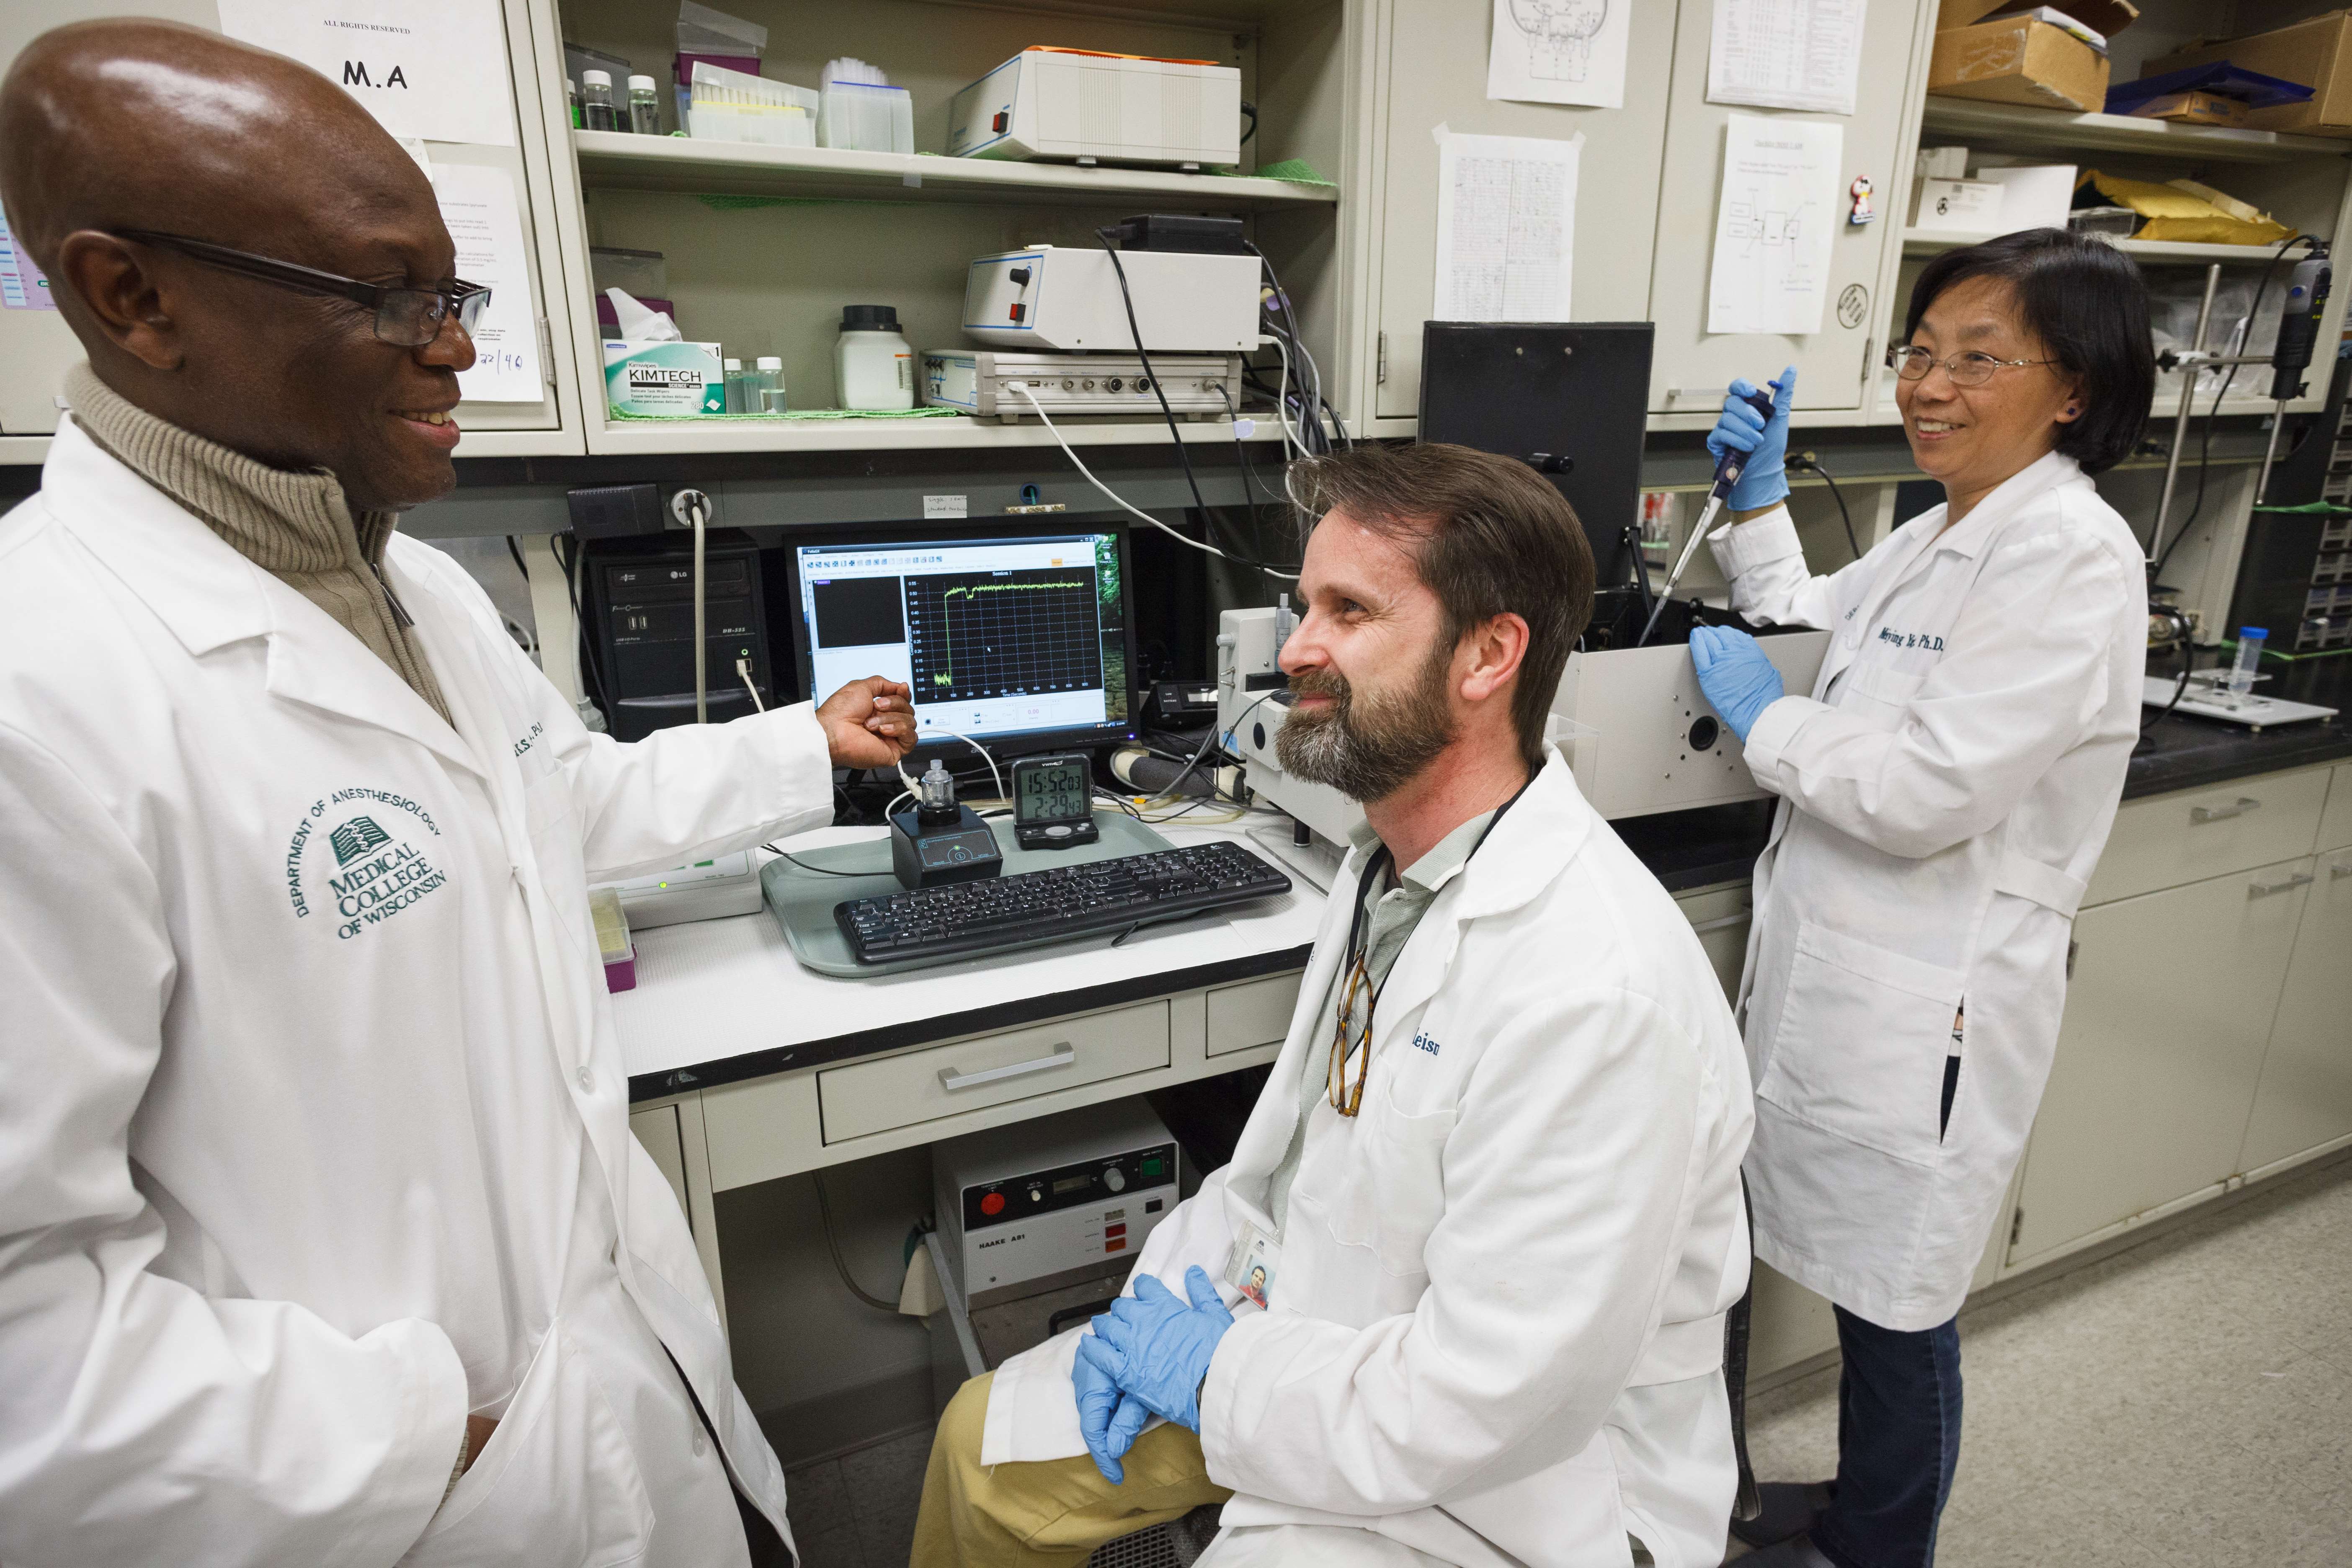 Four researchers in the lab